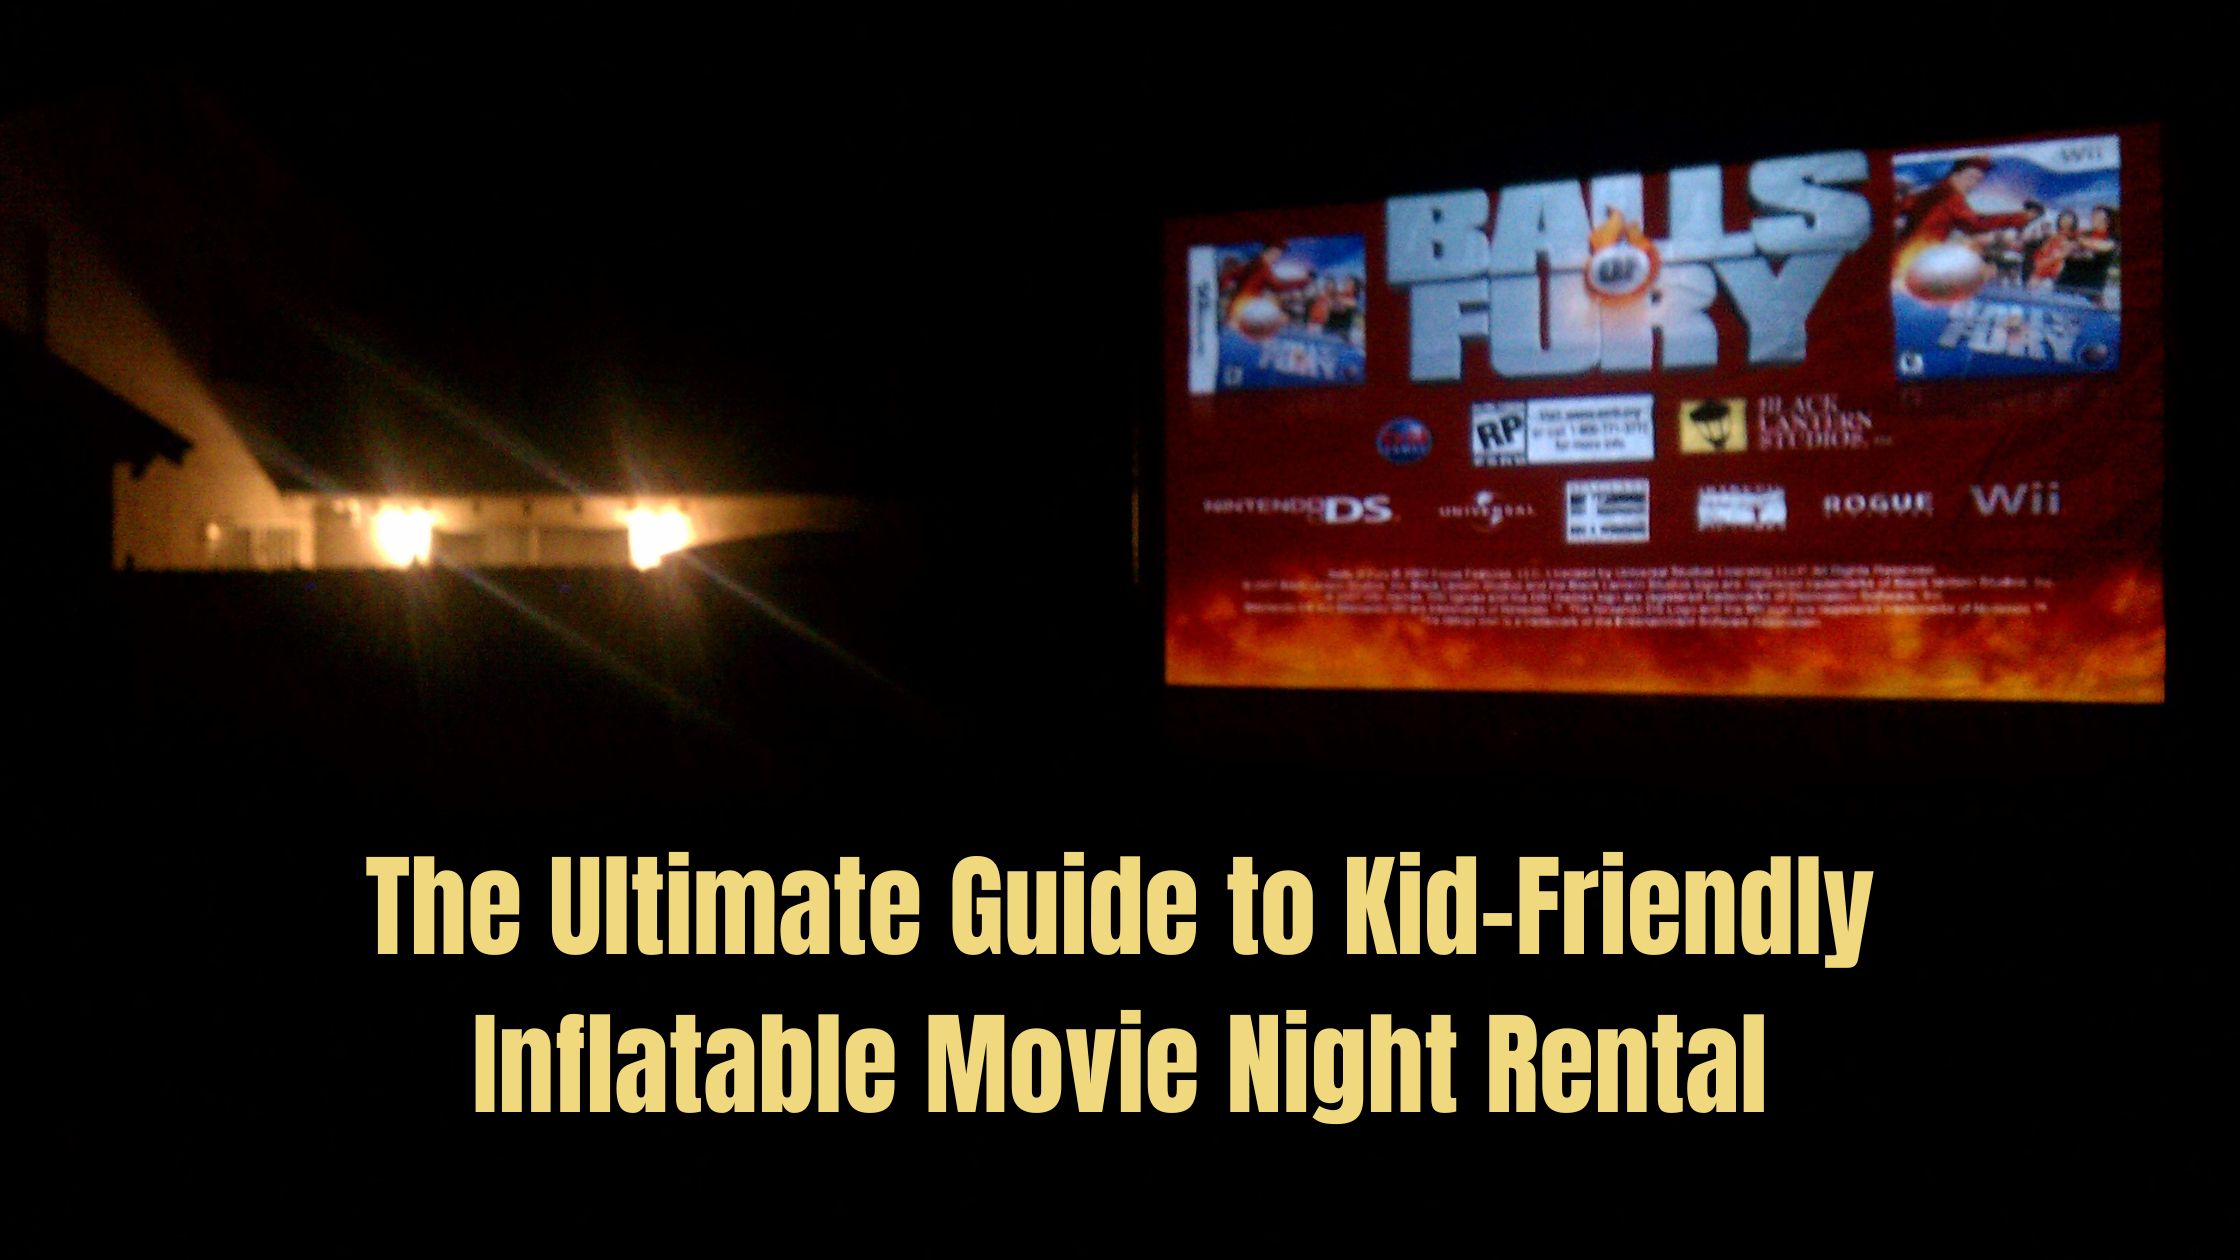 The Ultimate Guide to Kid-Friendly inflatable movie night rental